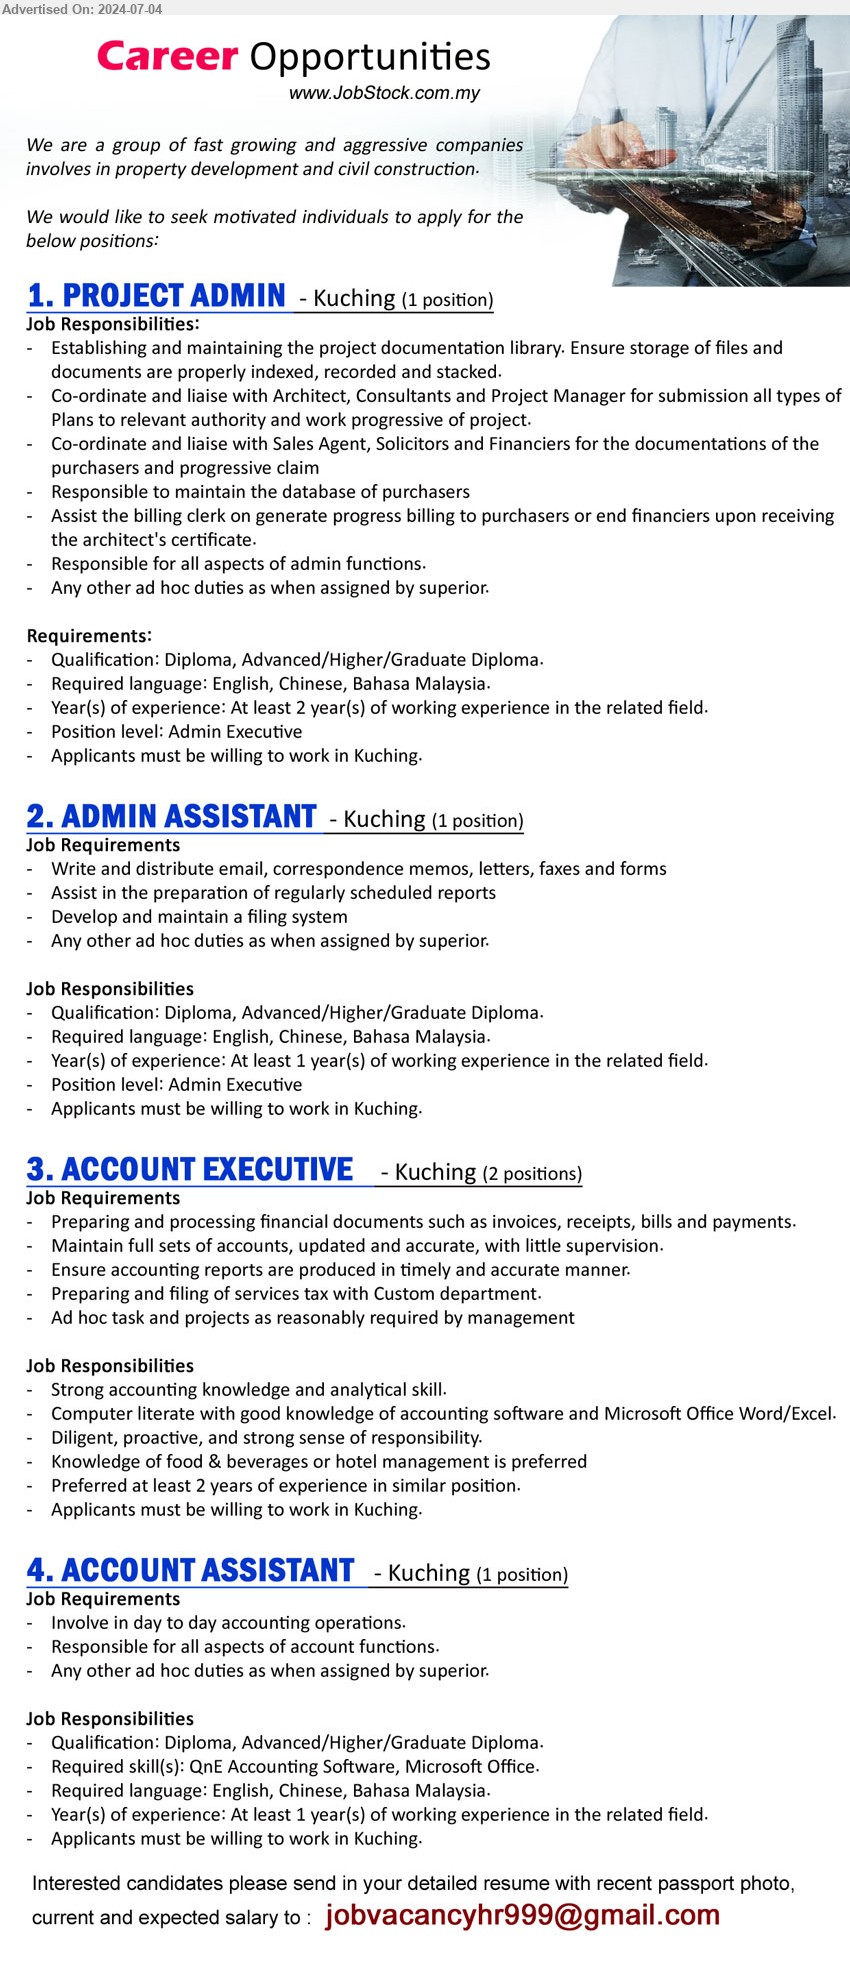 ADVERTISER (Property Development and Civil Construction) - 1. PROJECT ADMIN (Kuching), Diploma, Advanced/Higher/Graduate Diploma, 2 yrs. exp.,...
2. ADMIN ASSISTANT  (Kuching), Diploma, Advanced/Higher/Graduate Diploma, 1 yr. exp.,...
3. ACCOUNT EXECUTIVE (Kuching), Computer literate with good knowledge of accounting software and Microsoft Office Word/Excel, 2 yrs. exp.,...
4. ACCOUNT ASSISTANT (Kuching), Diploma, Advanced/Higher/Graduate Diploma, Required skill(s): QnE Accounting Software, Microsoft Office.,...
Email resume to ...